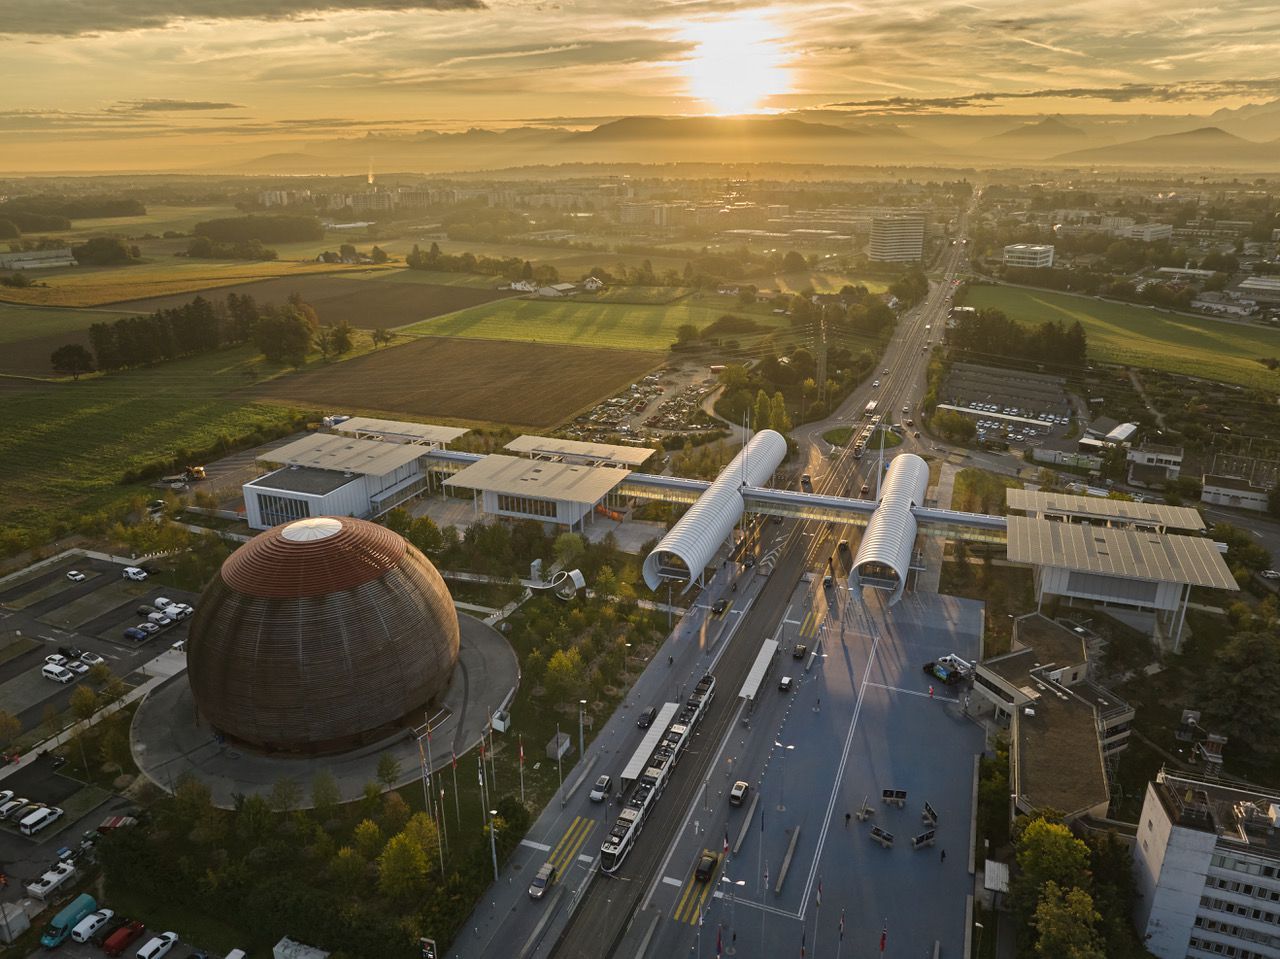 The new Science Gateway visitor centre at CERN opened its doors to the public this weekend.